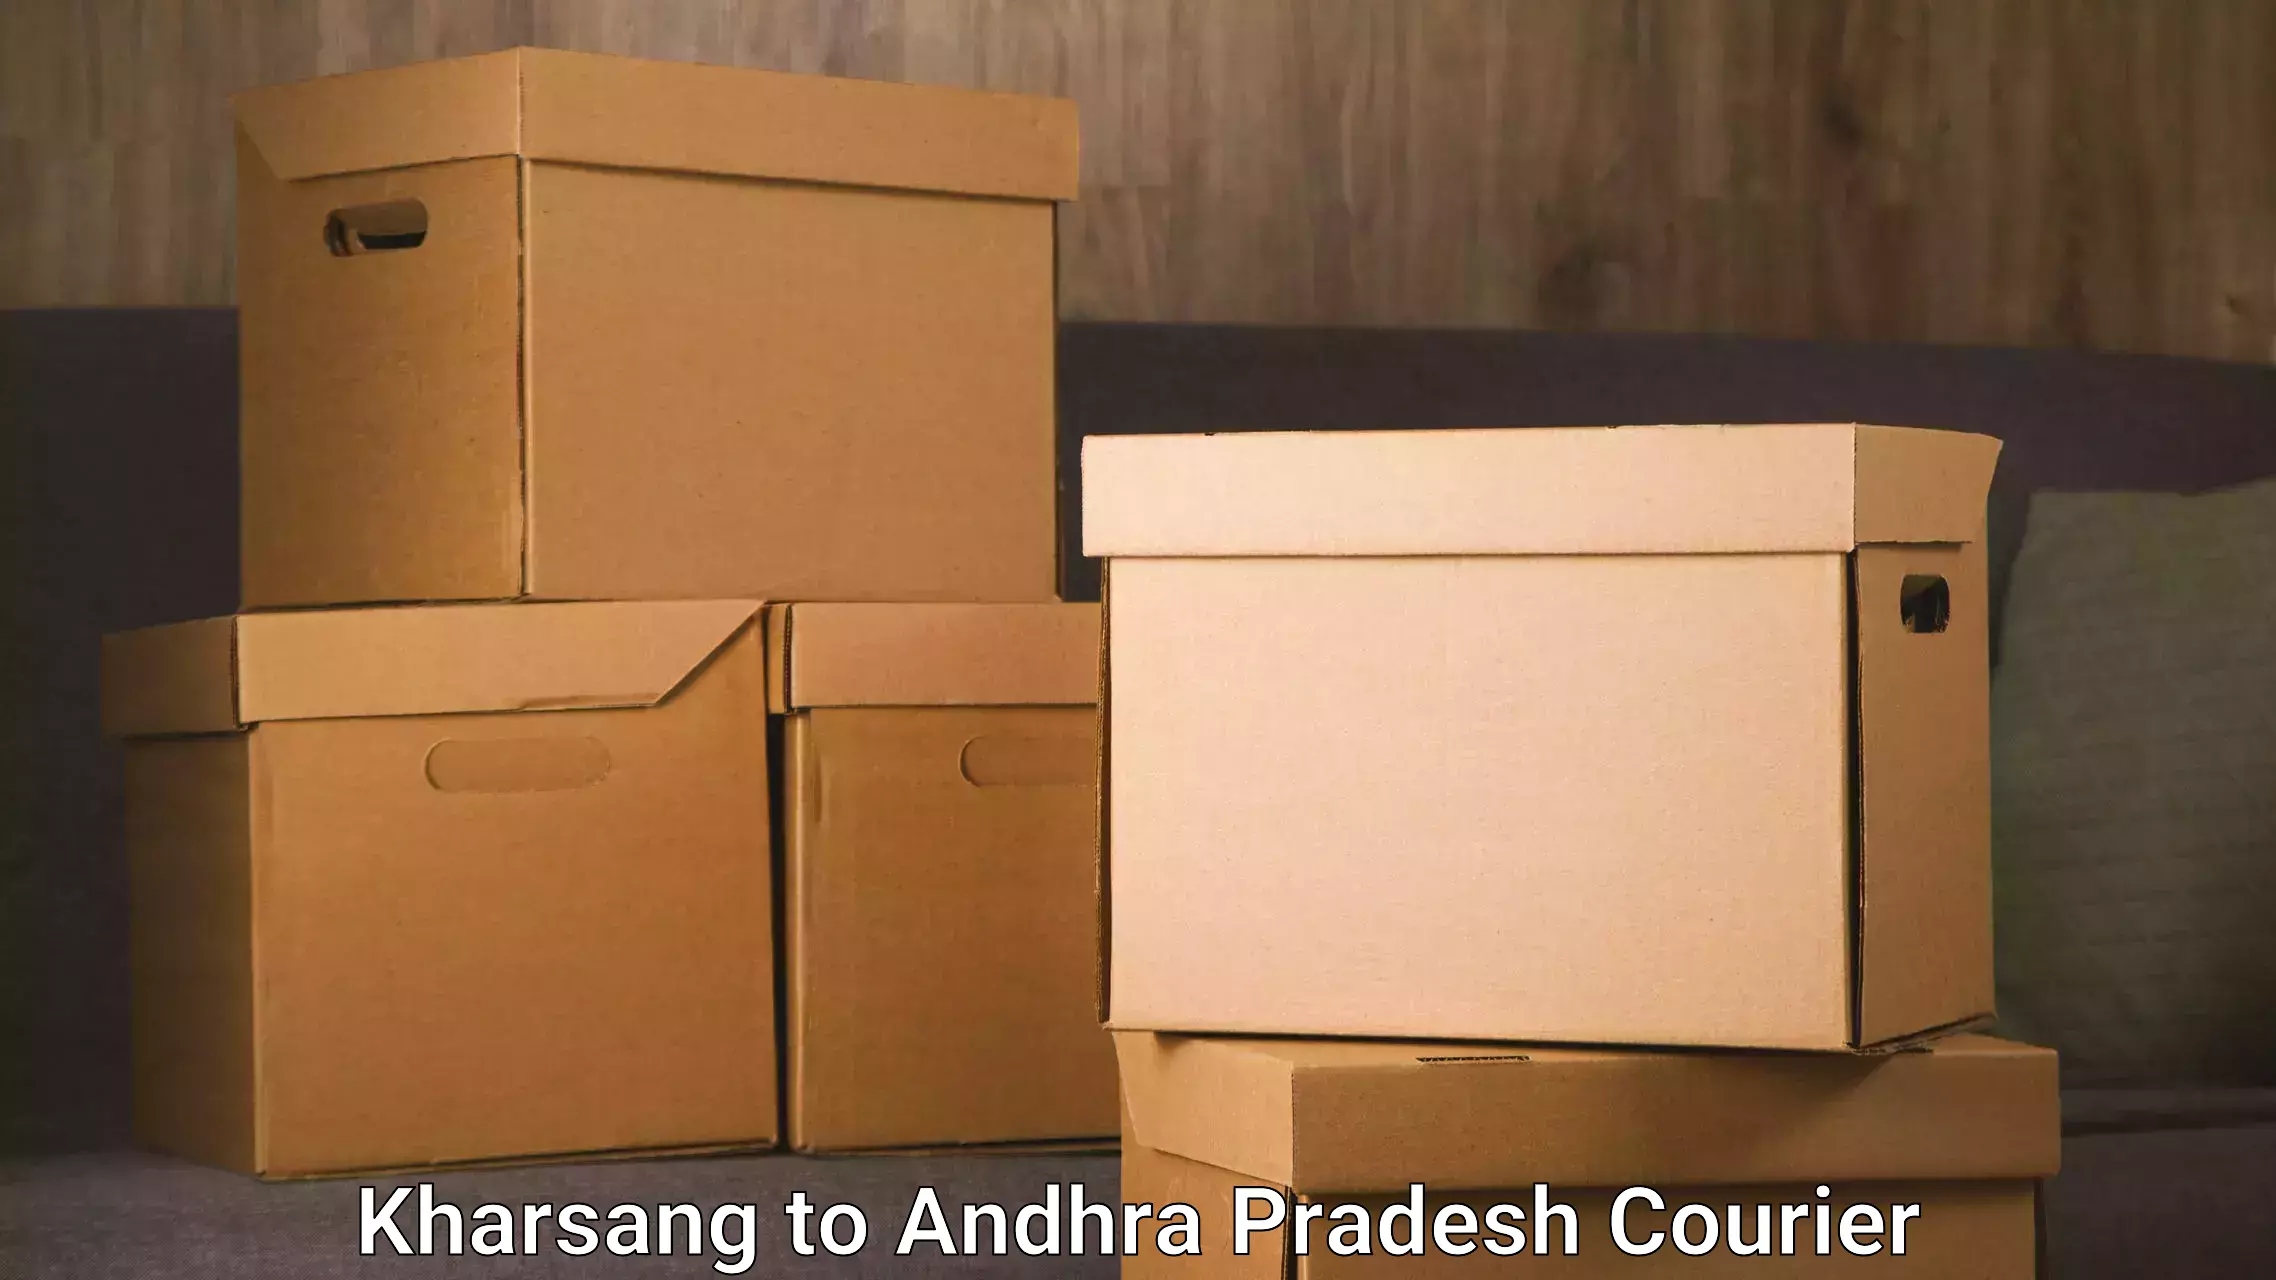 Courier service efficiency Kharsang to Anakapalli